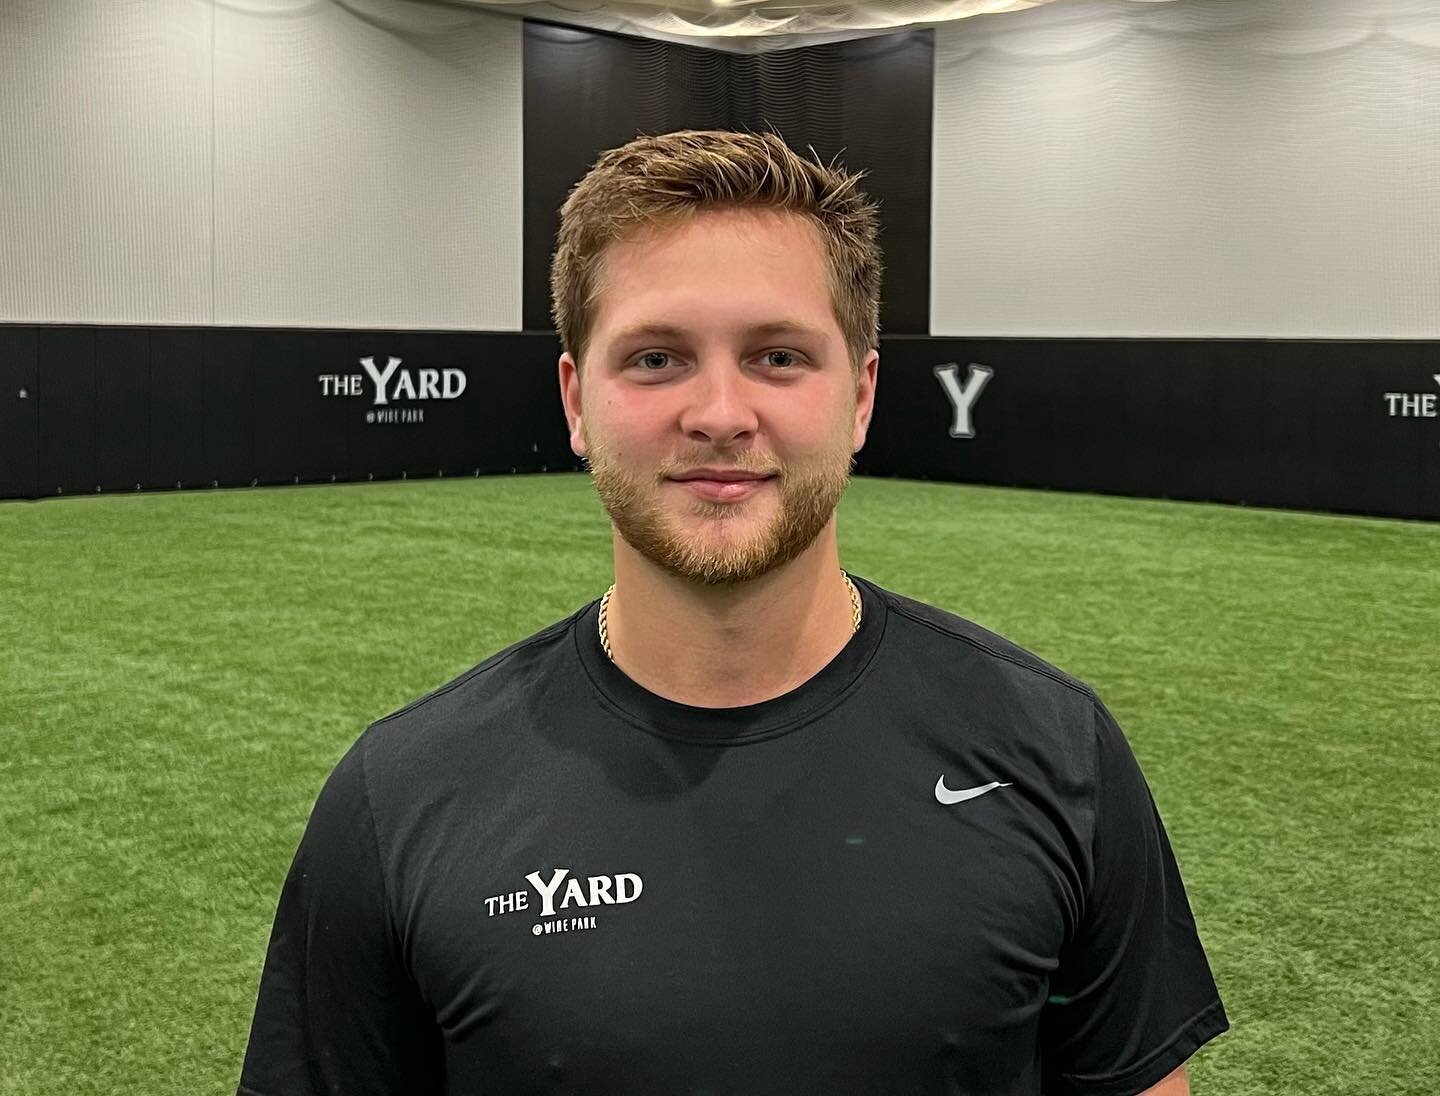 Noah Walters is on staff with us here at The Yard, and he would love to give you baseball pitching lessons!! ⚾️

👀Check out The Yard @ Wire Park app to see his availability! 

💥MAKE IT HAPPEN

#makeithappen #baseball #softball #athens #athensga #li